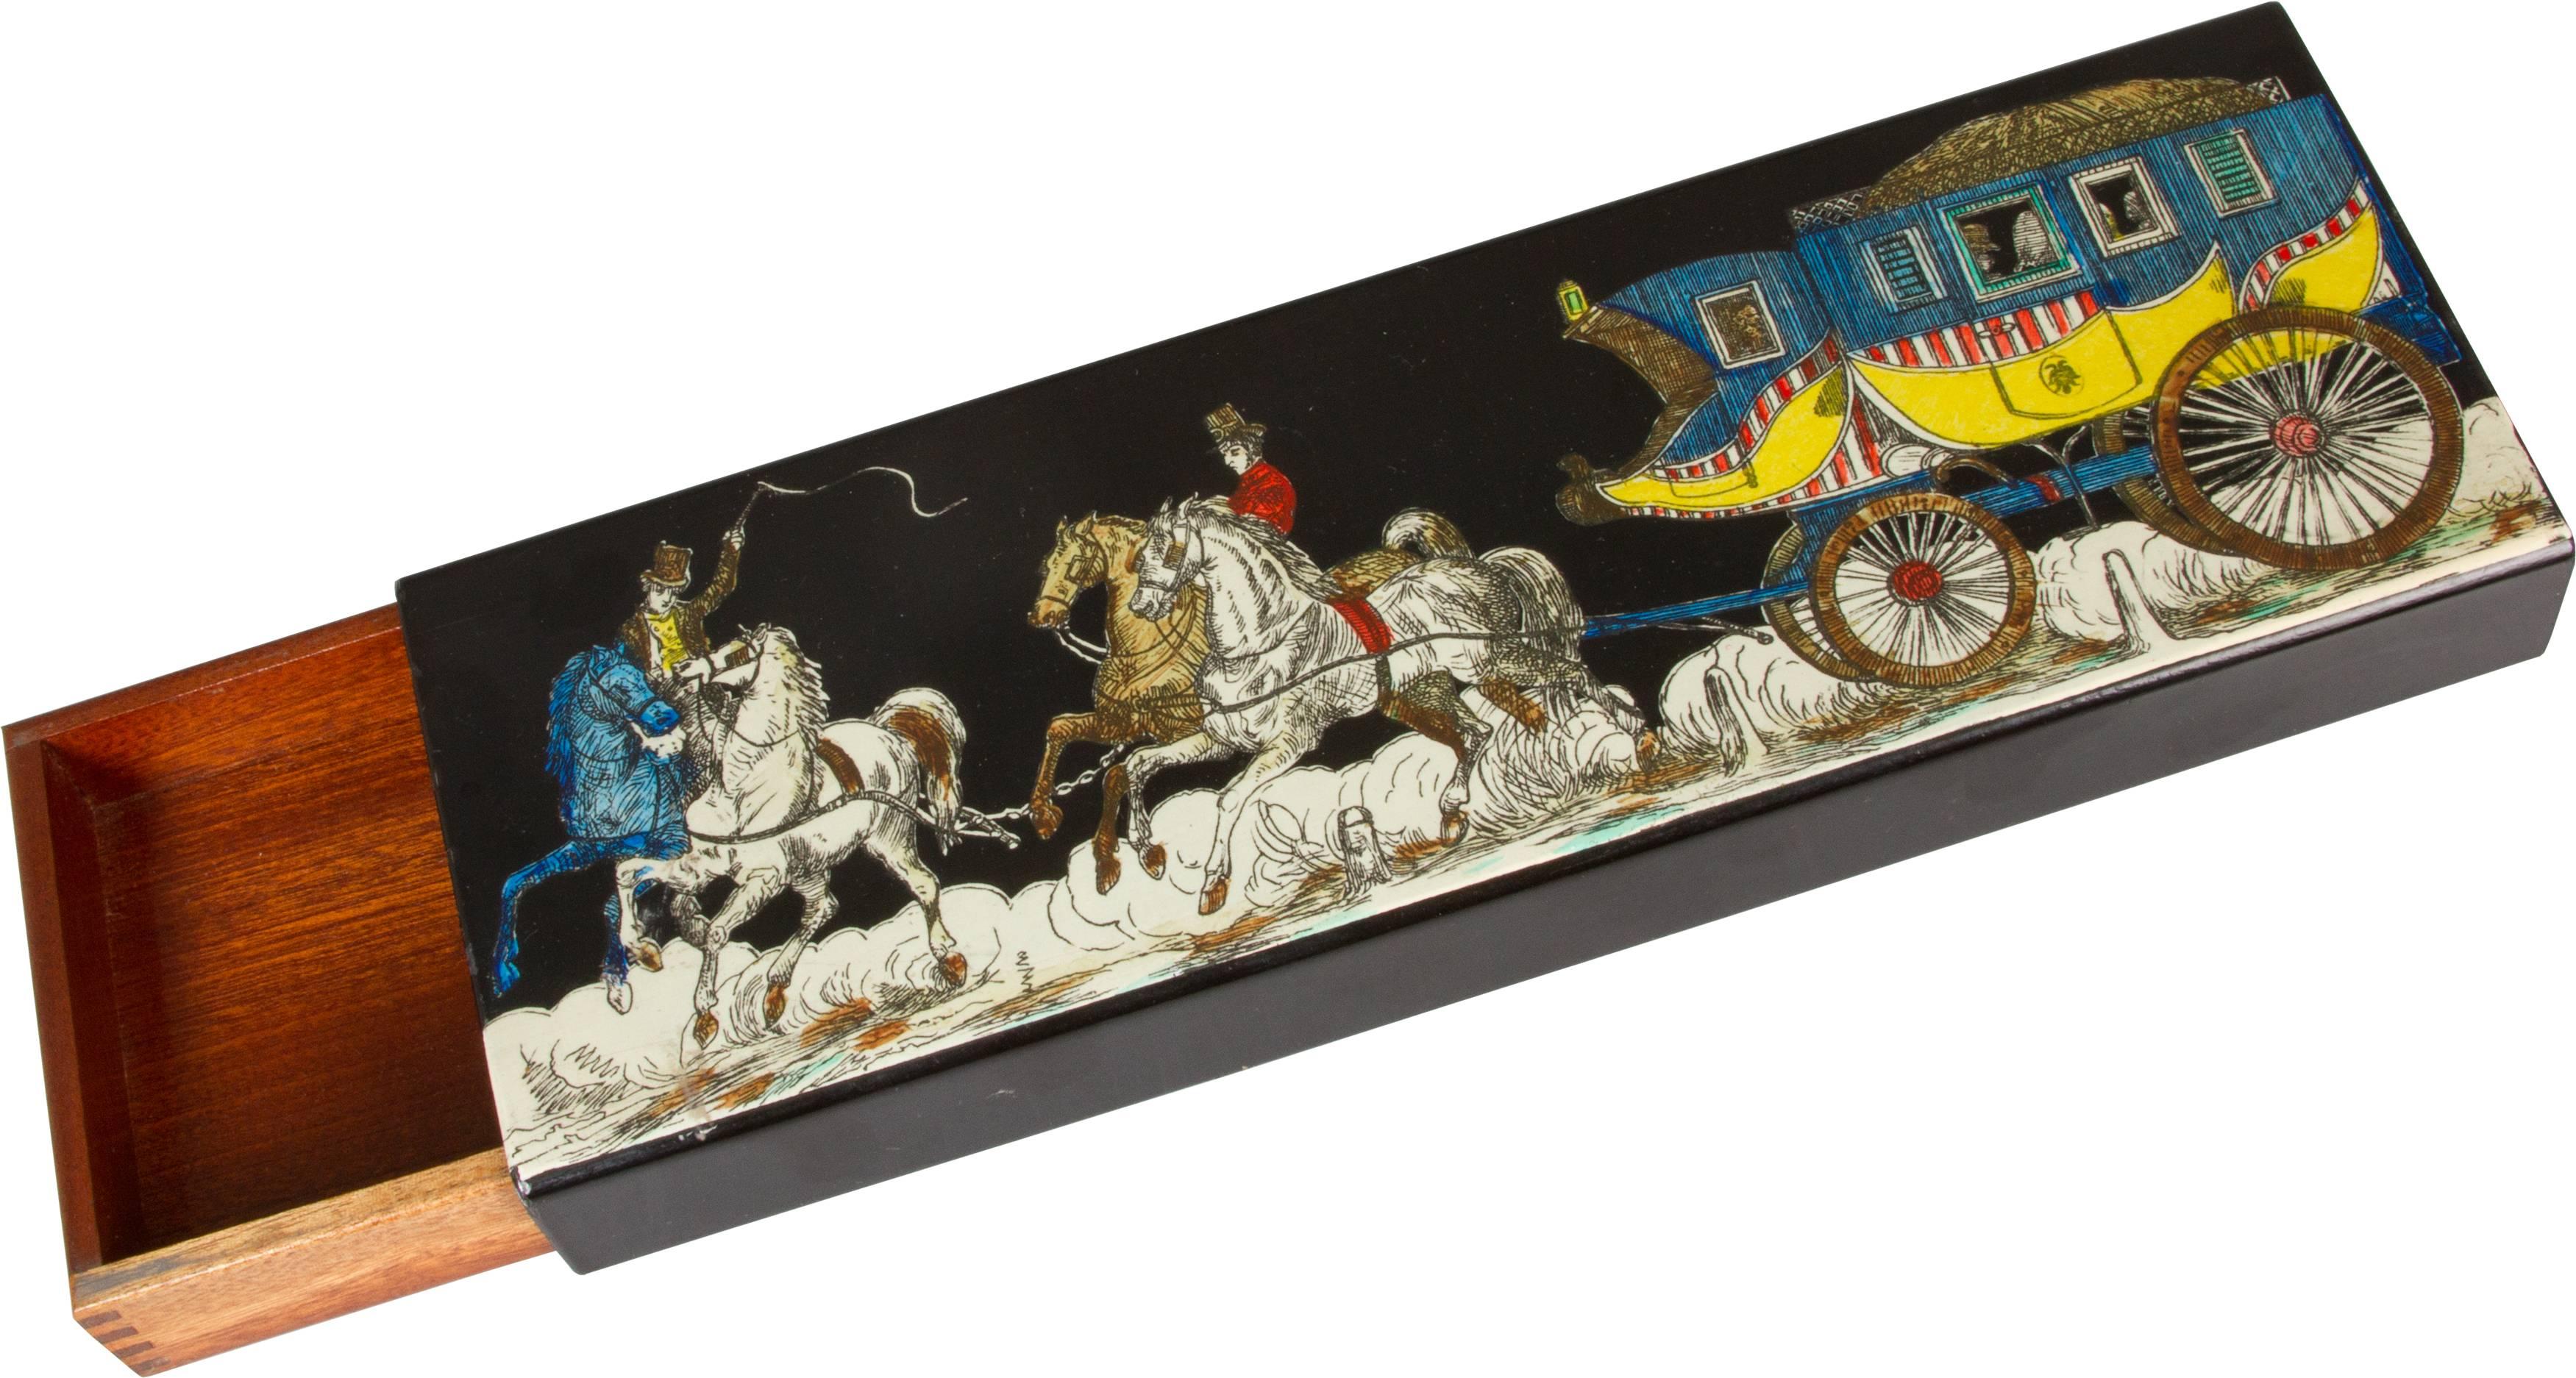 Horses drawing a carriage are depicted here in this sliding wooden box.